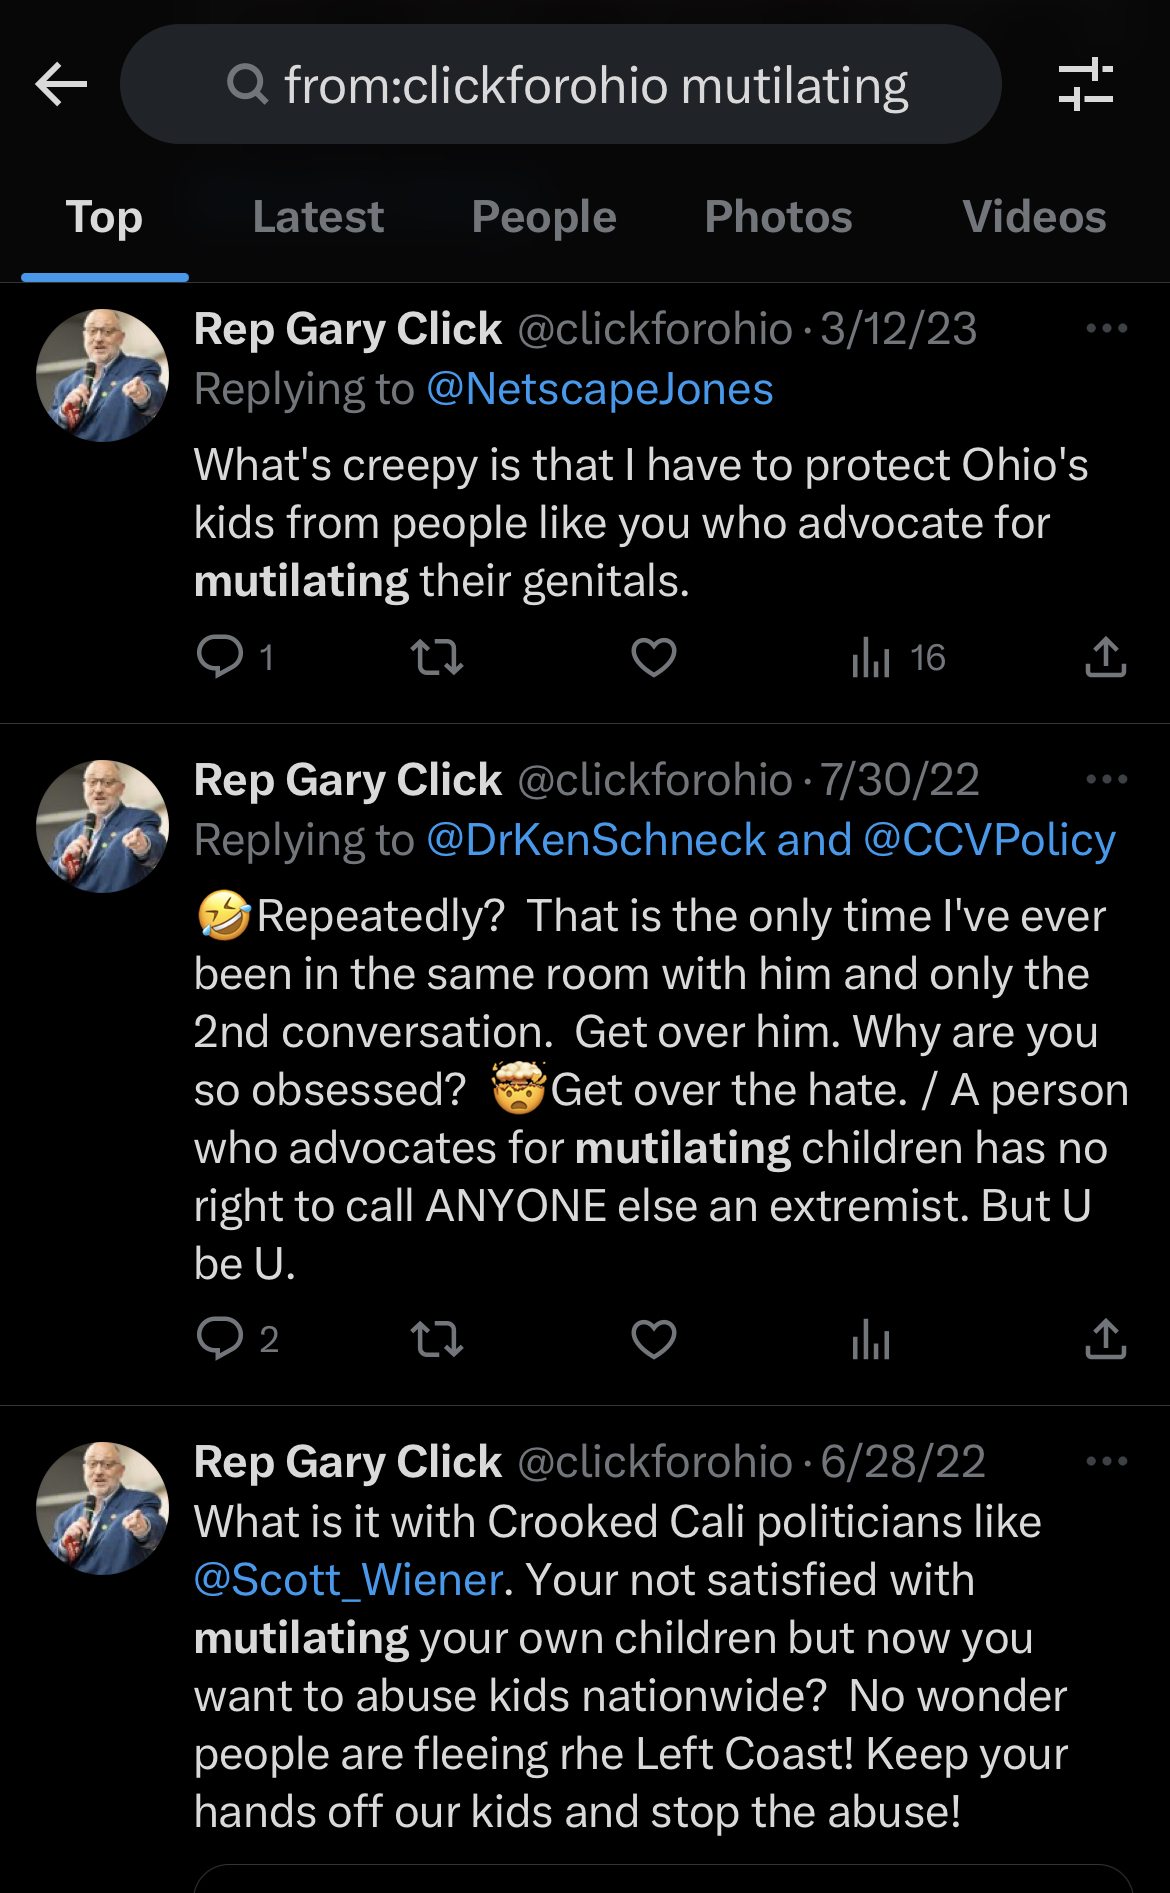 Image is a screenshot of how many times one can find the word mutilate in Ohio State Rep Gary Click's Tweets. His replies are to the Center for Christian Virtue @CCVPolicy and Dr. Ken Schneck @DrKenSchneck on 7/30/22. In part it reads: a person who advocates for mutilating children has no right to call anyone an extremist but u be u. On 3/12/23 @clickforohio tweets @NetscapeJones: What's creepy is I have to protect Ohio's kids from people like you who advocate for mutilating their genitals. on 6/28/22 @click for ohio tweets @Scott_Wiener what is it with crooked politicians like (tags Scott Wiener) Your (sic) not satisfied with mutilating your own children but now you want to abuse kids nationwide? No wonder people are fleeing the west coast! Keep your hands off our kids and stop the abuse!